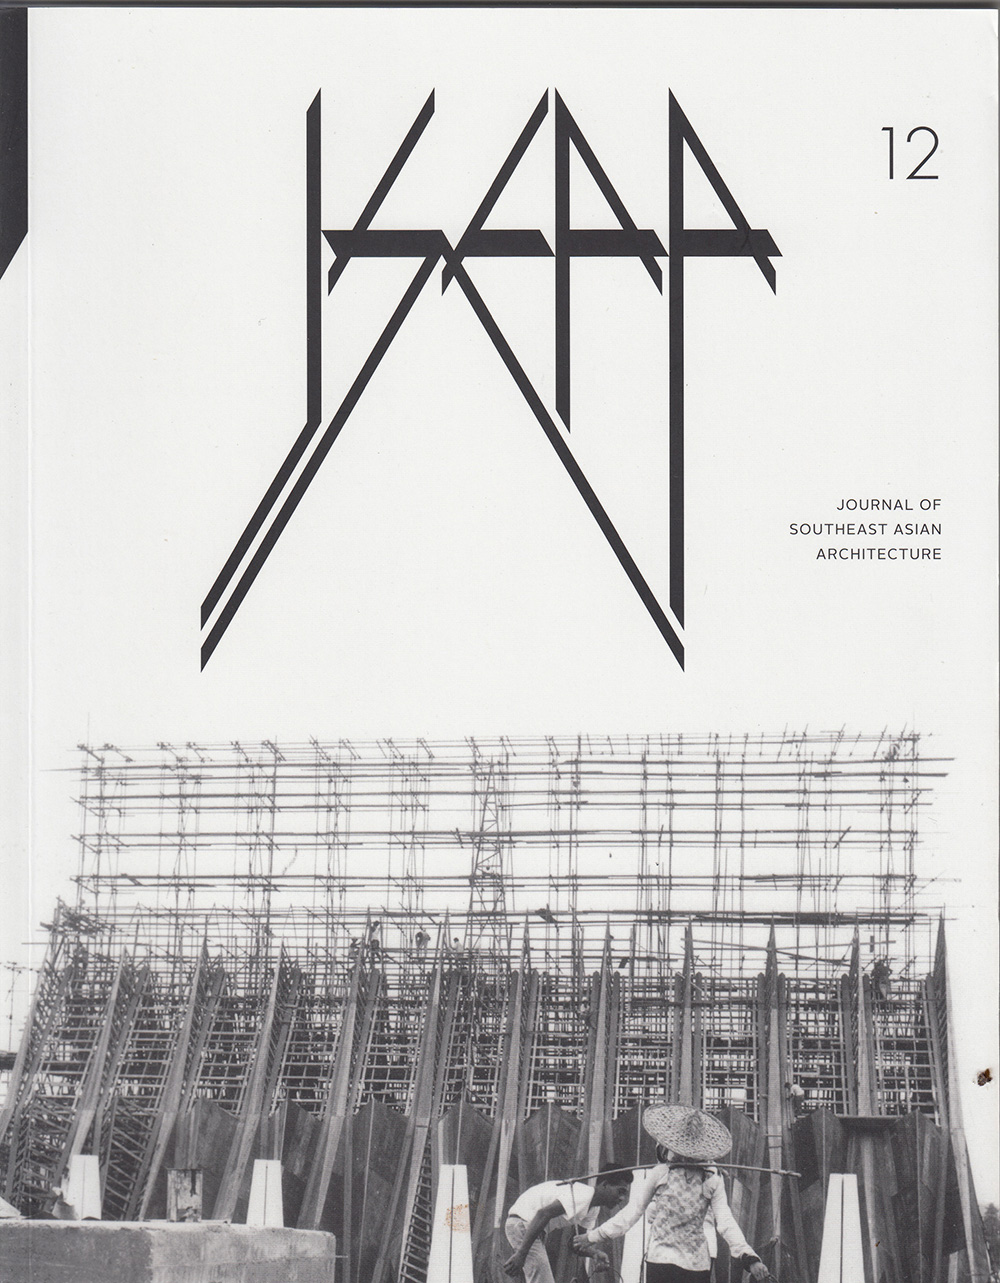 Journal of Southeast Asian Architecture (Volume 12)